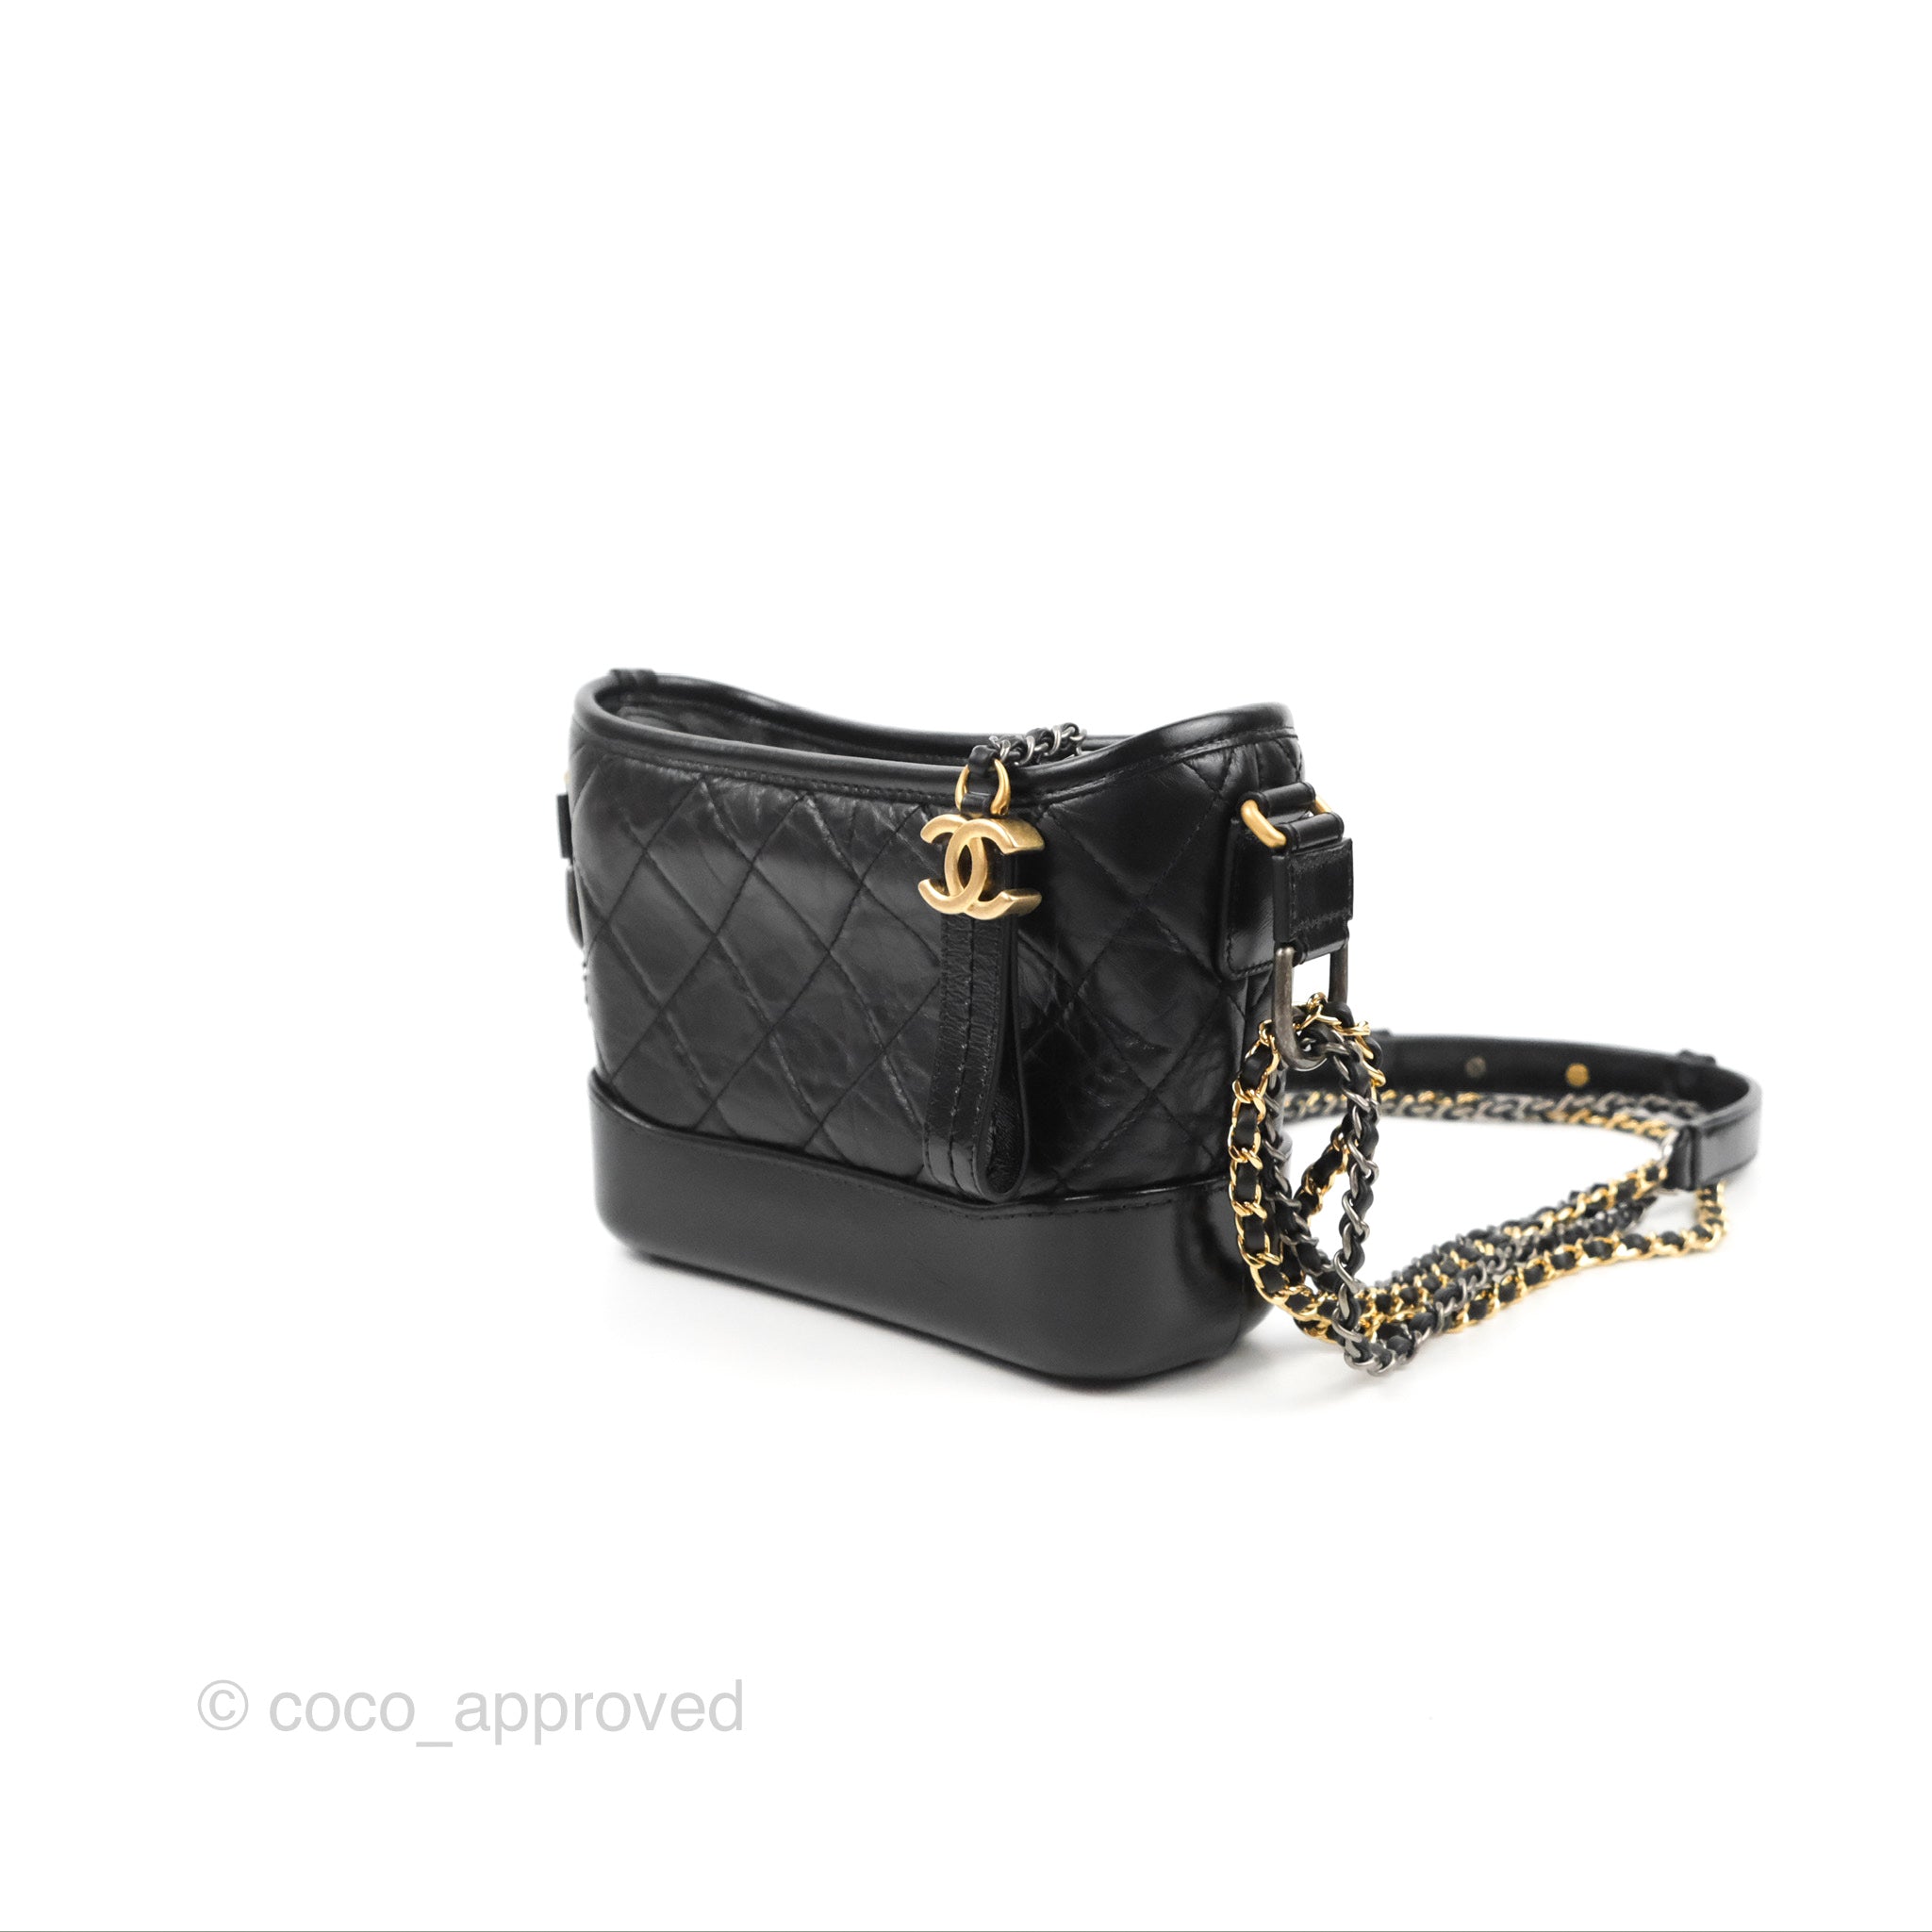 At Auction: A CHANEL AGED CALFSKIN QUILTED SMALL GABRIELLE HOBO BLACK